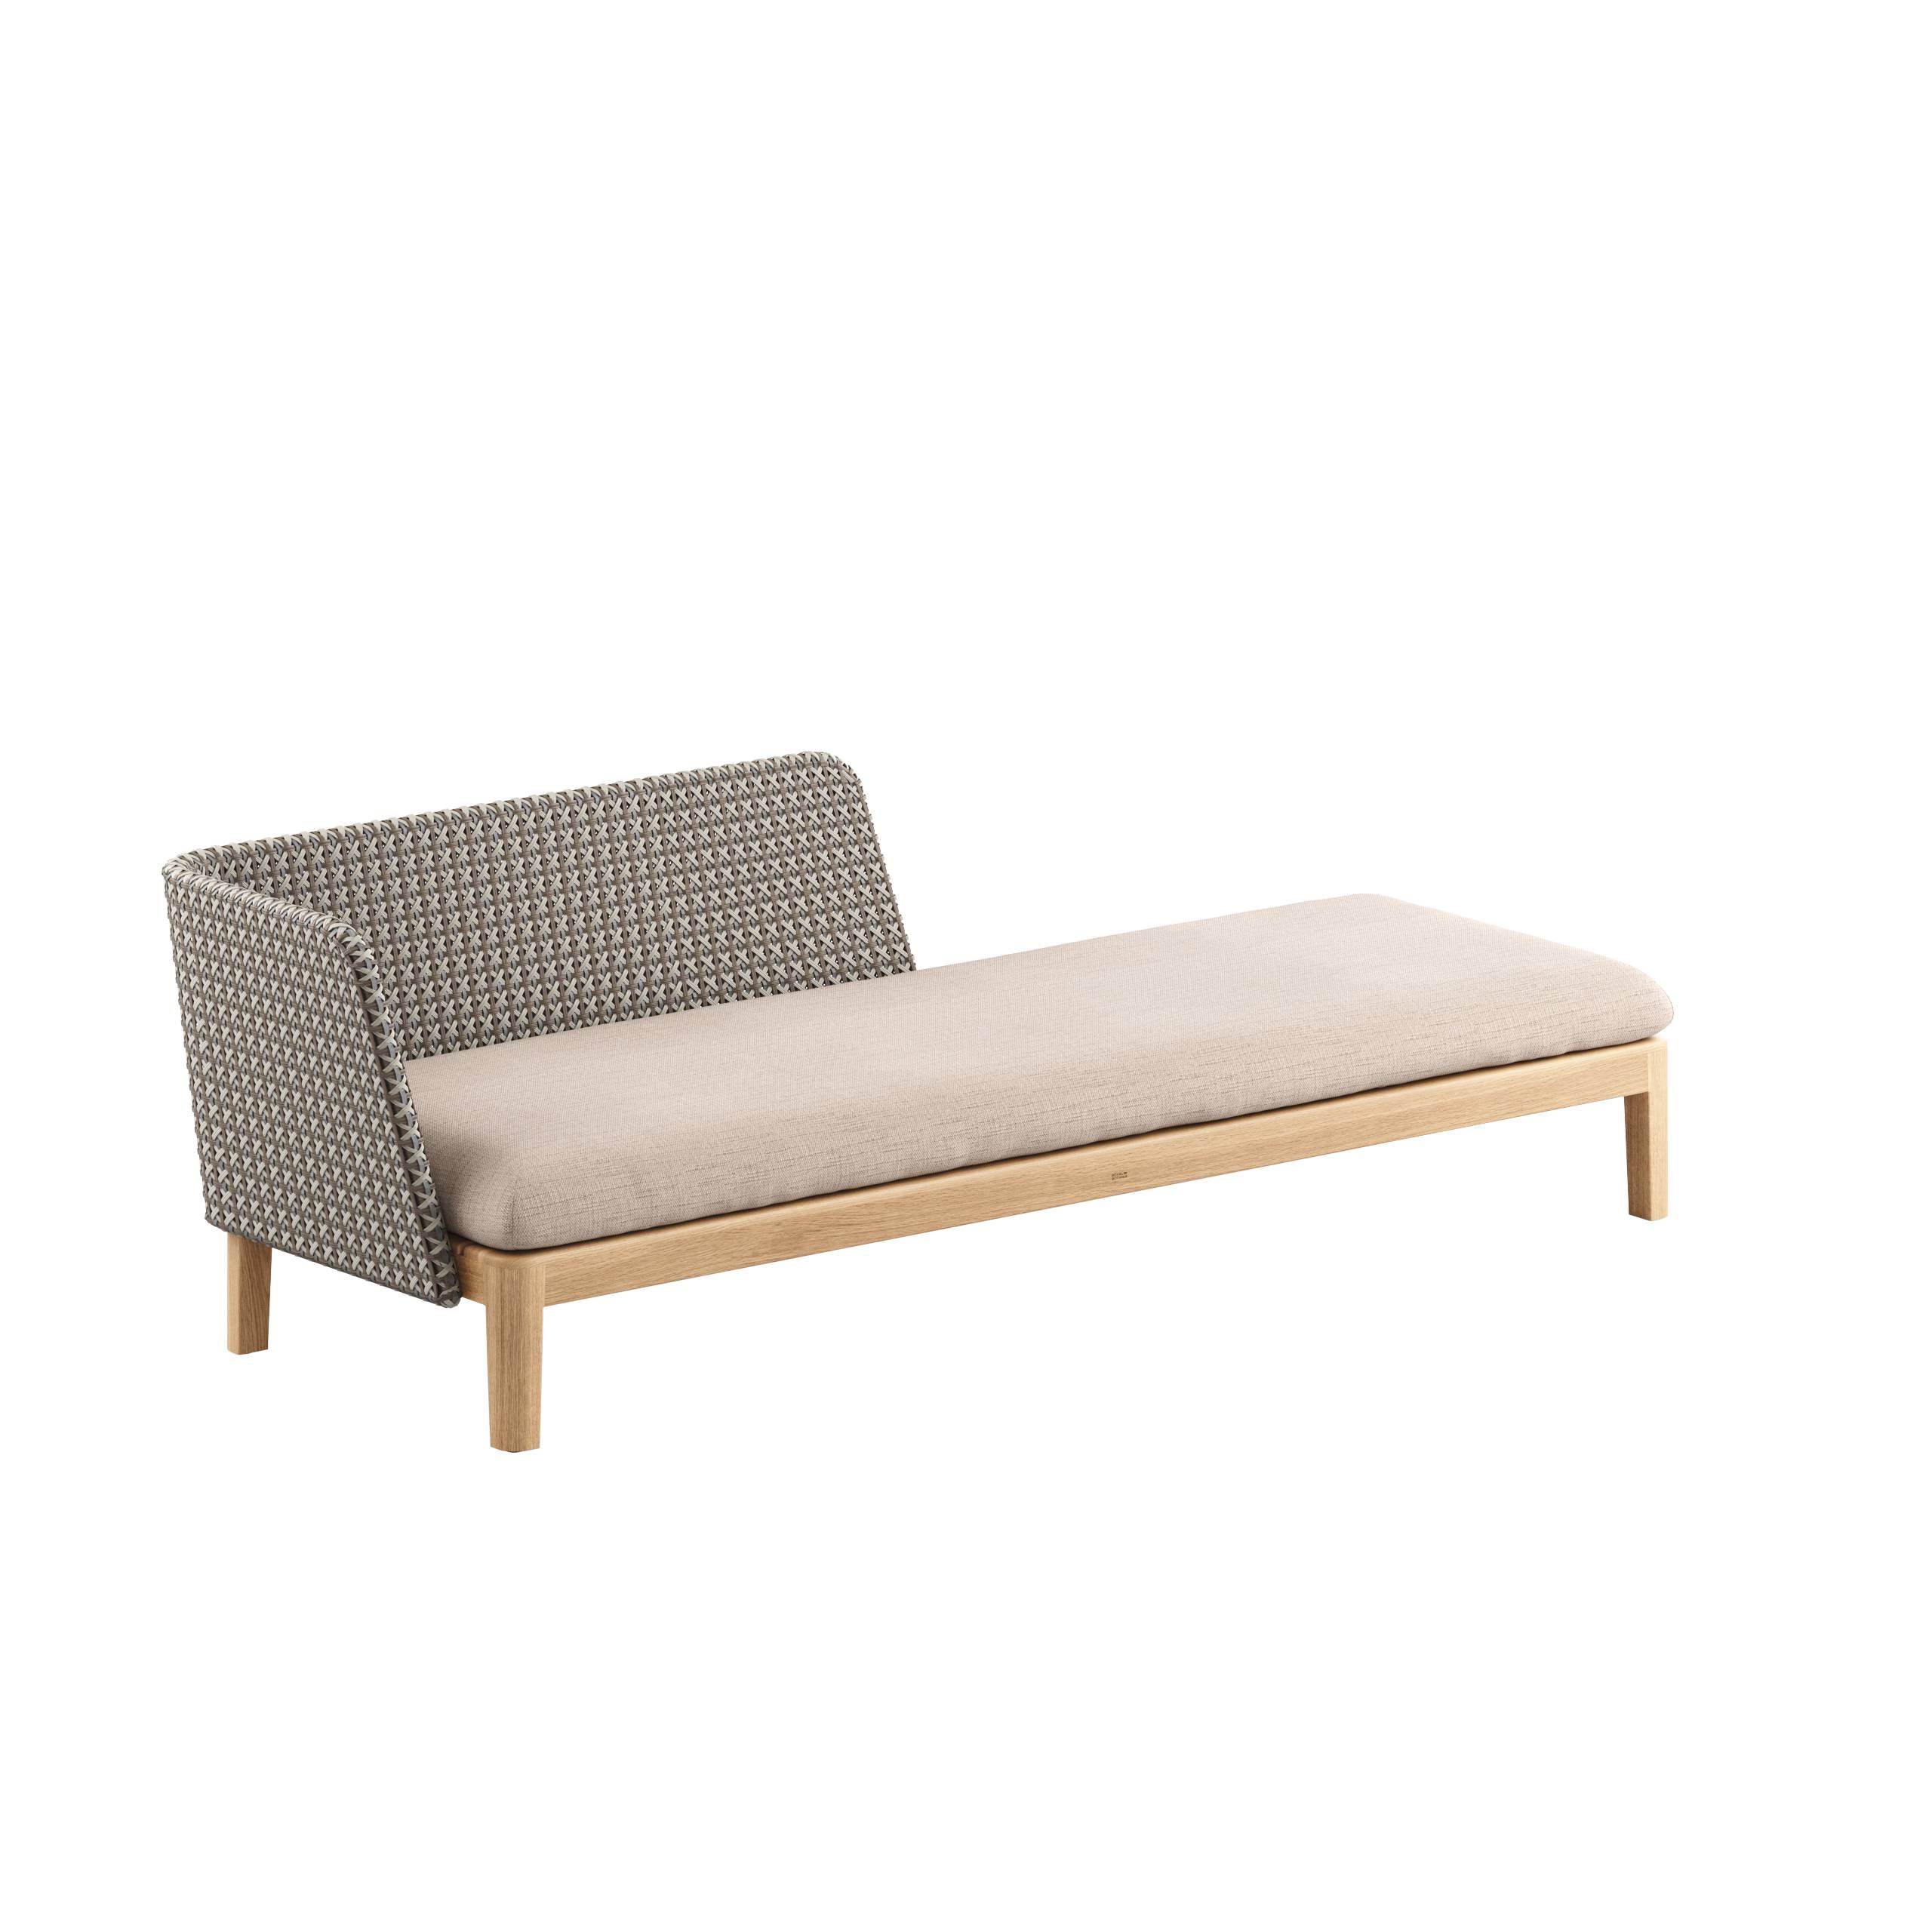 Calypso Lounge 210 R2 With Woven Back And Right Armrest